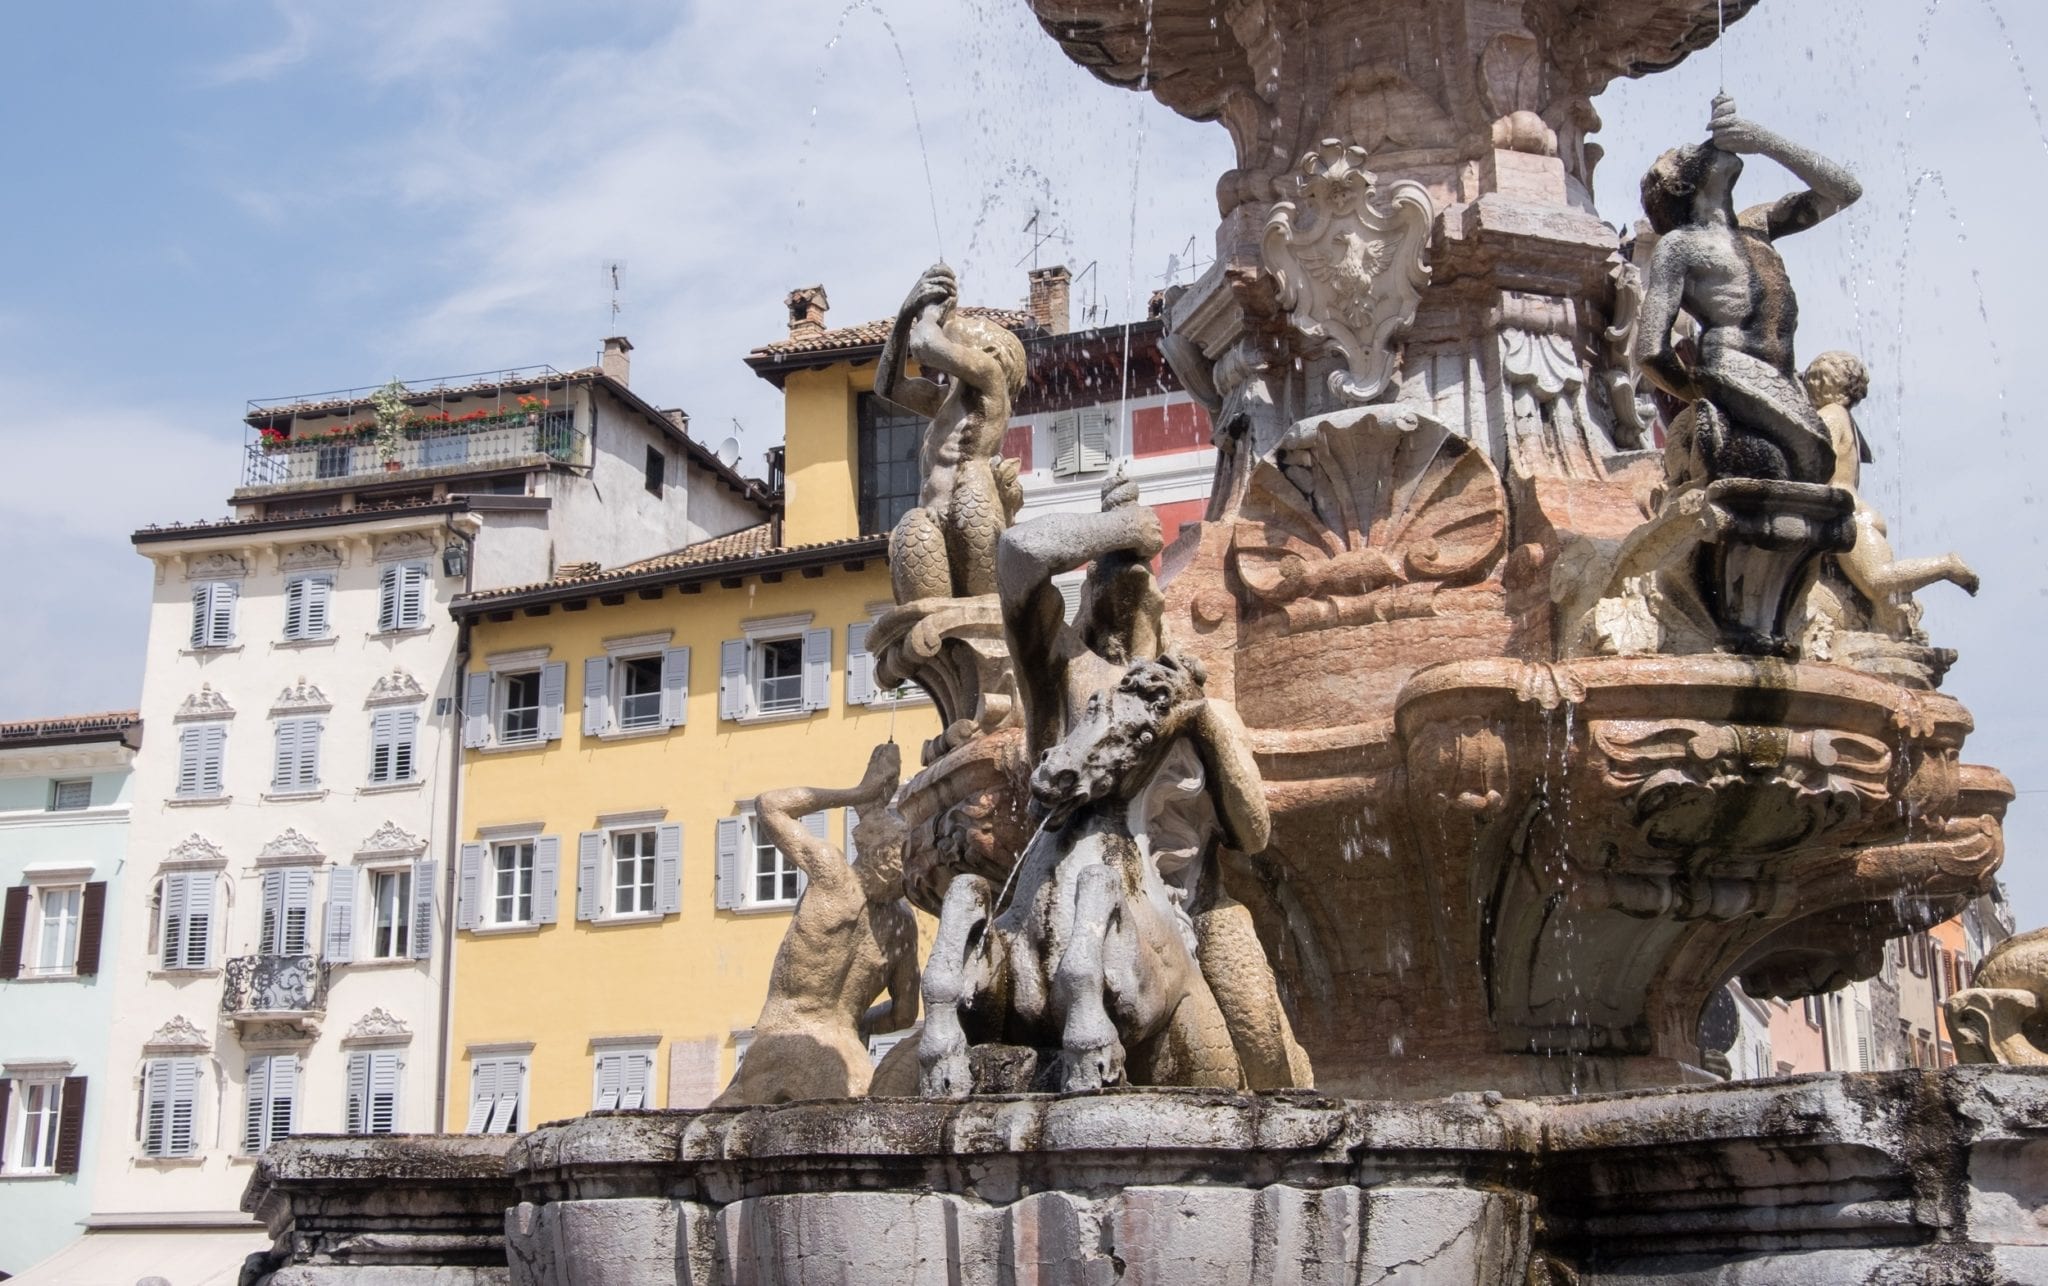 A fountain covered with nymphs spurts out water next to yellow and white buildings in Trento, Italy.